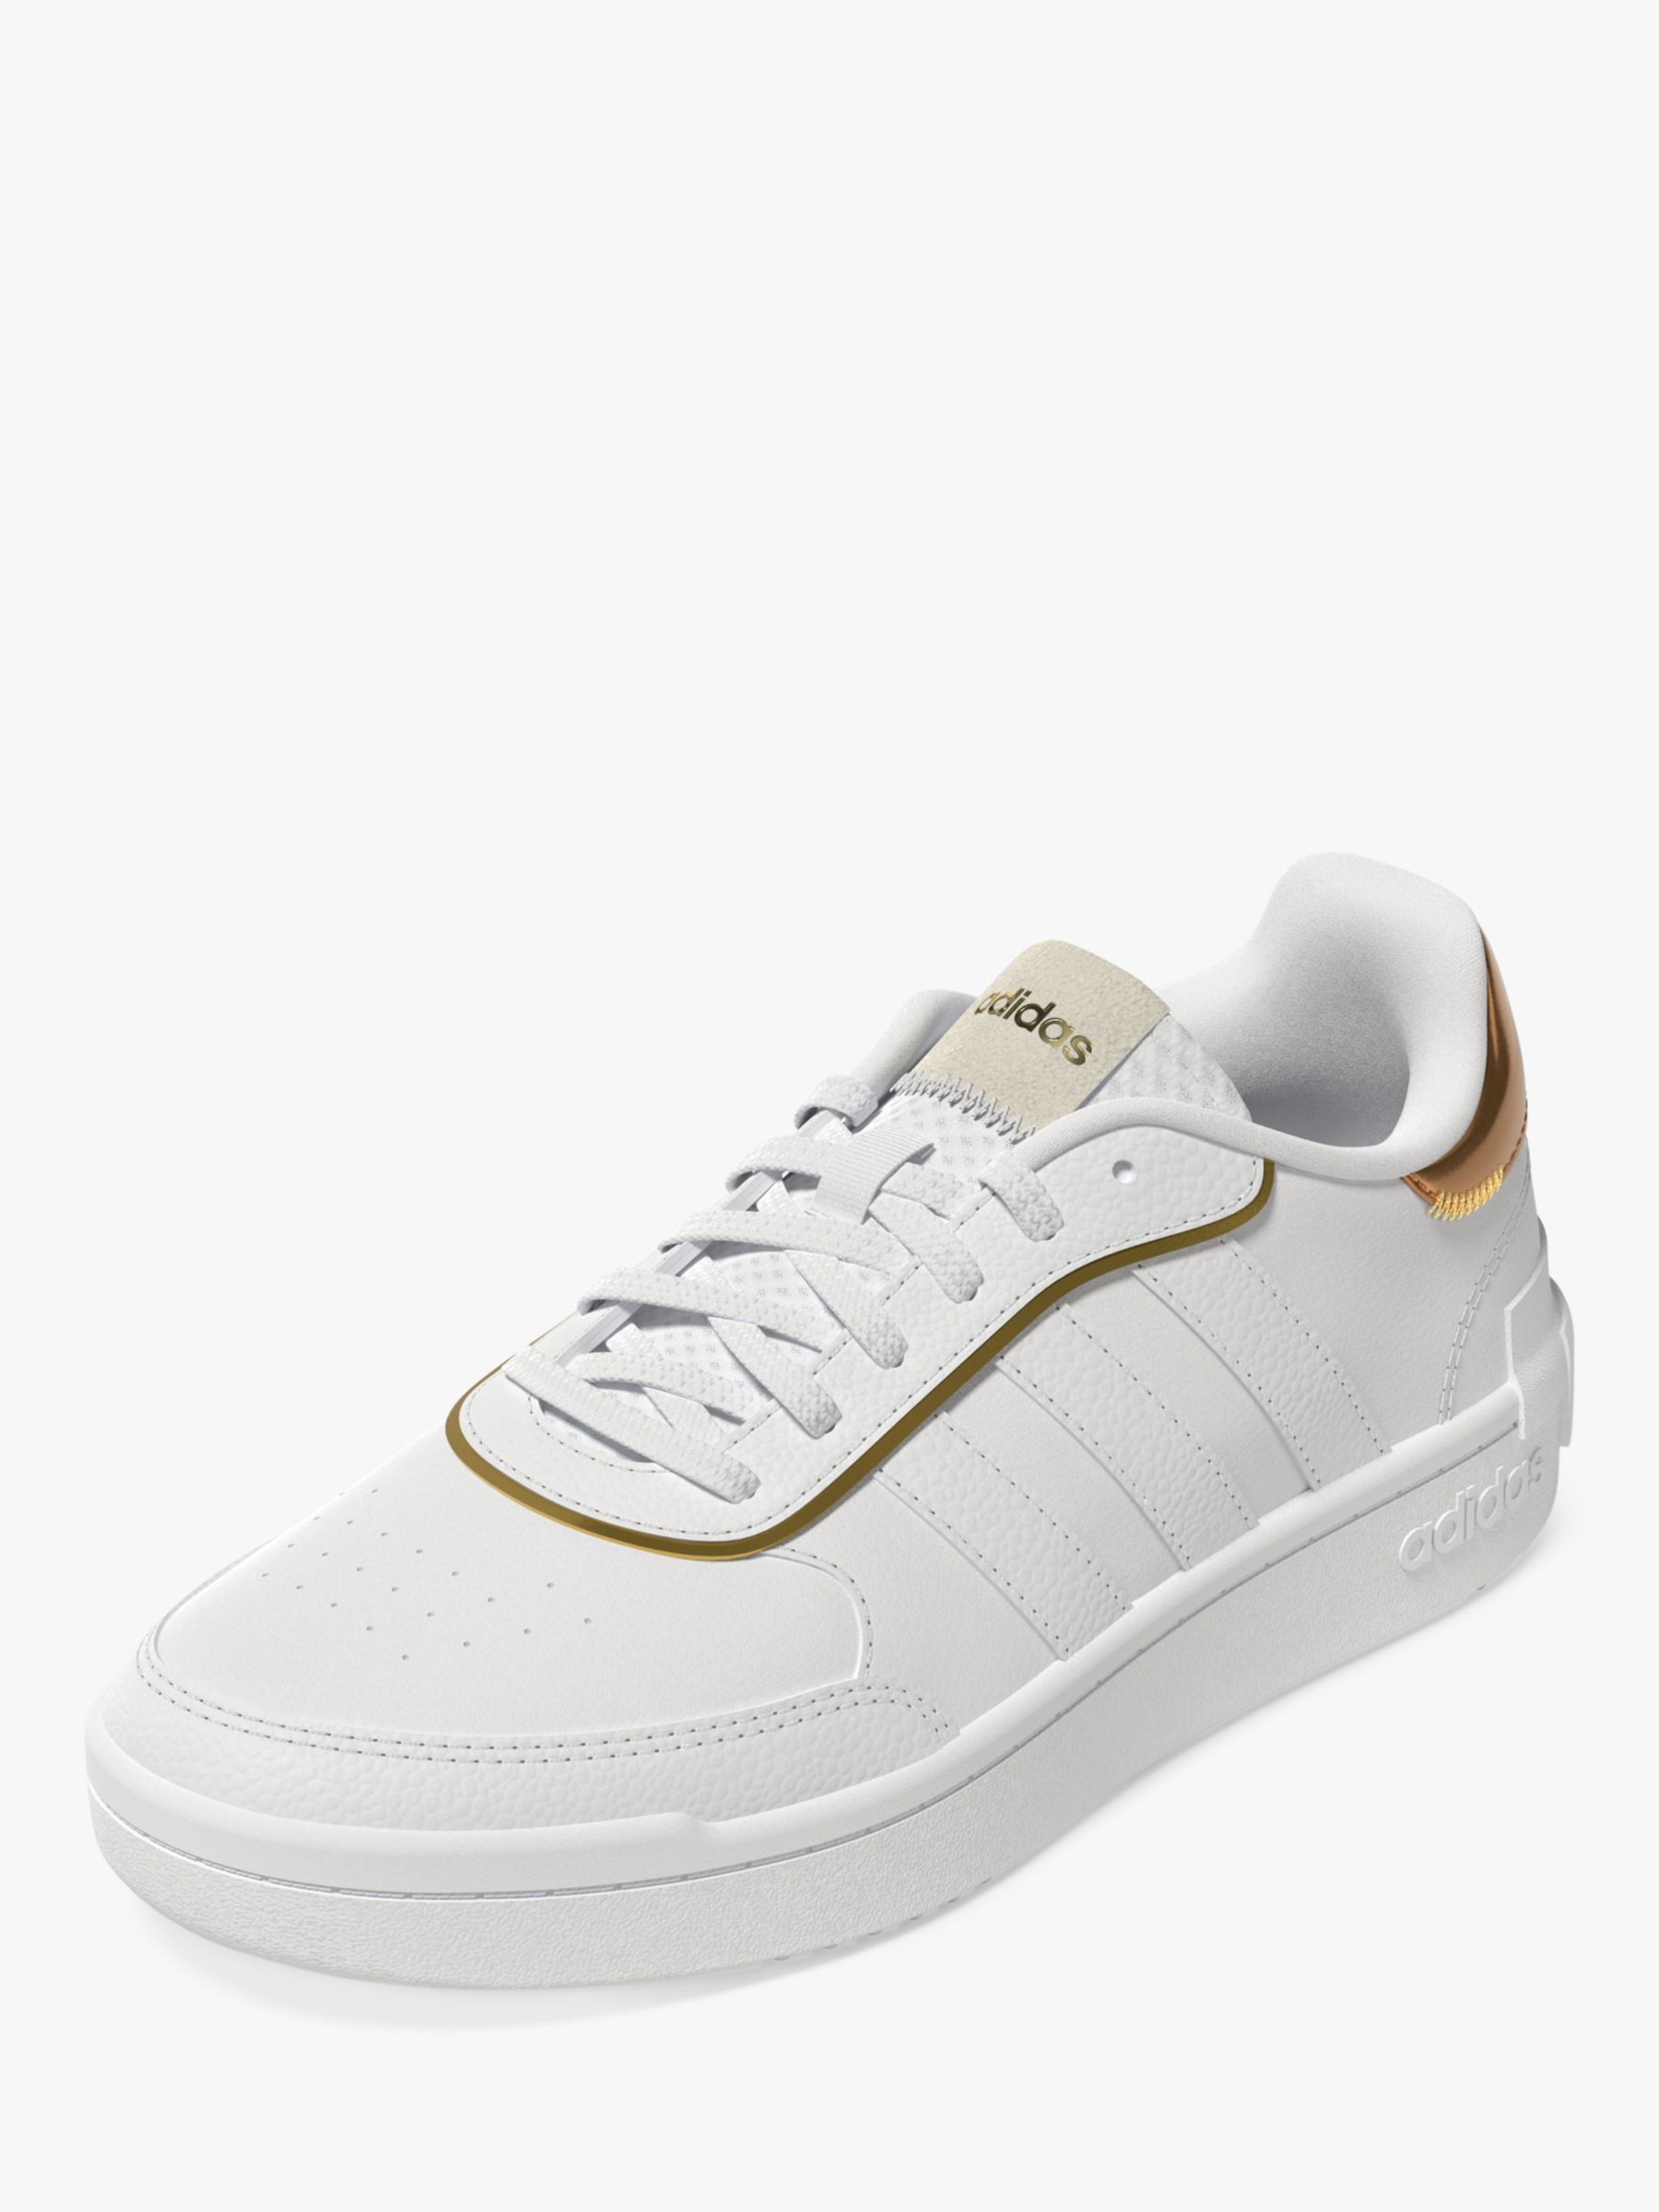 adidas Postmove Trainers, White/Matte Gold at John Lewis Partners